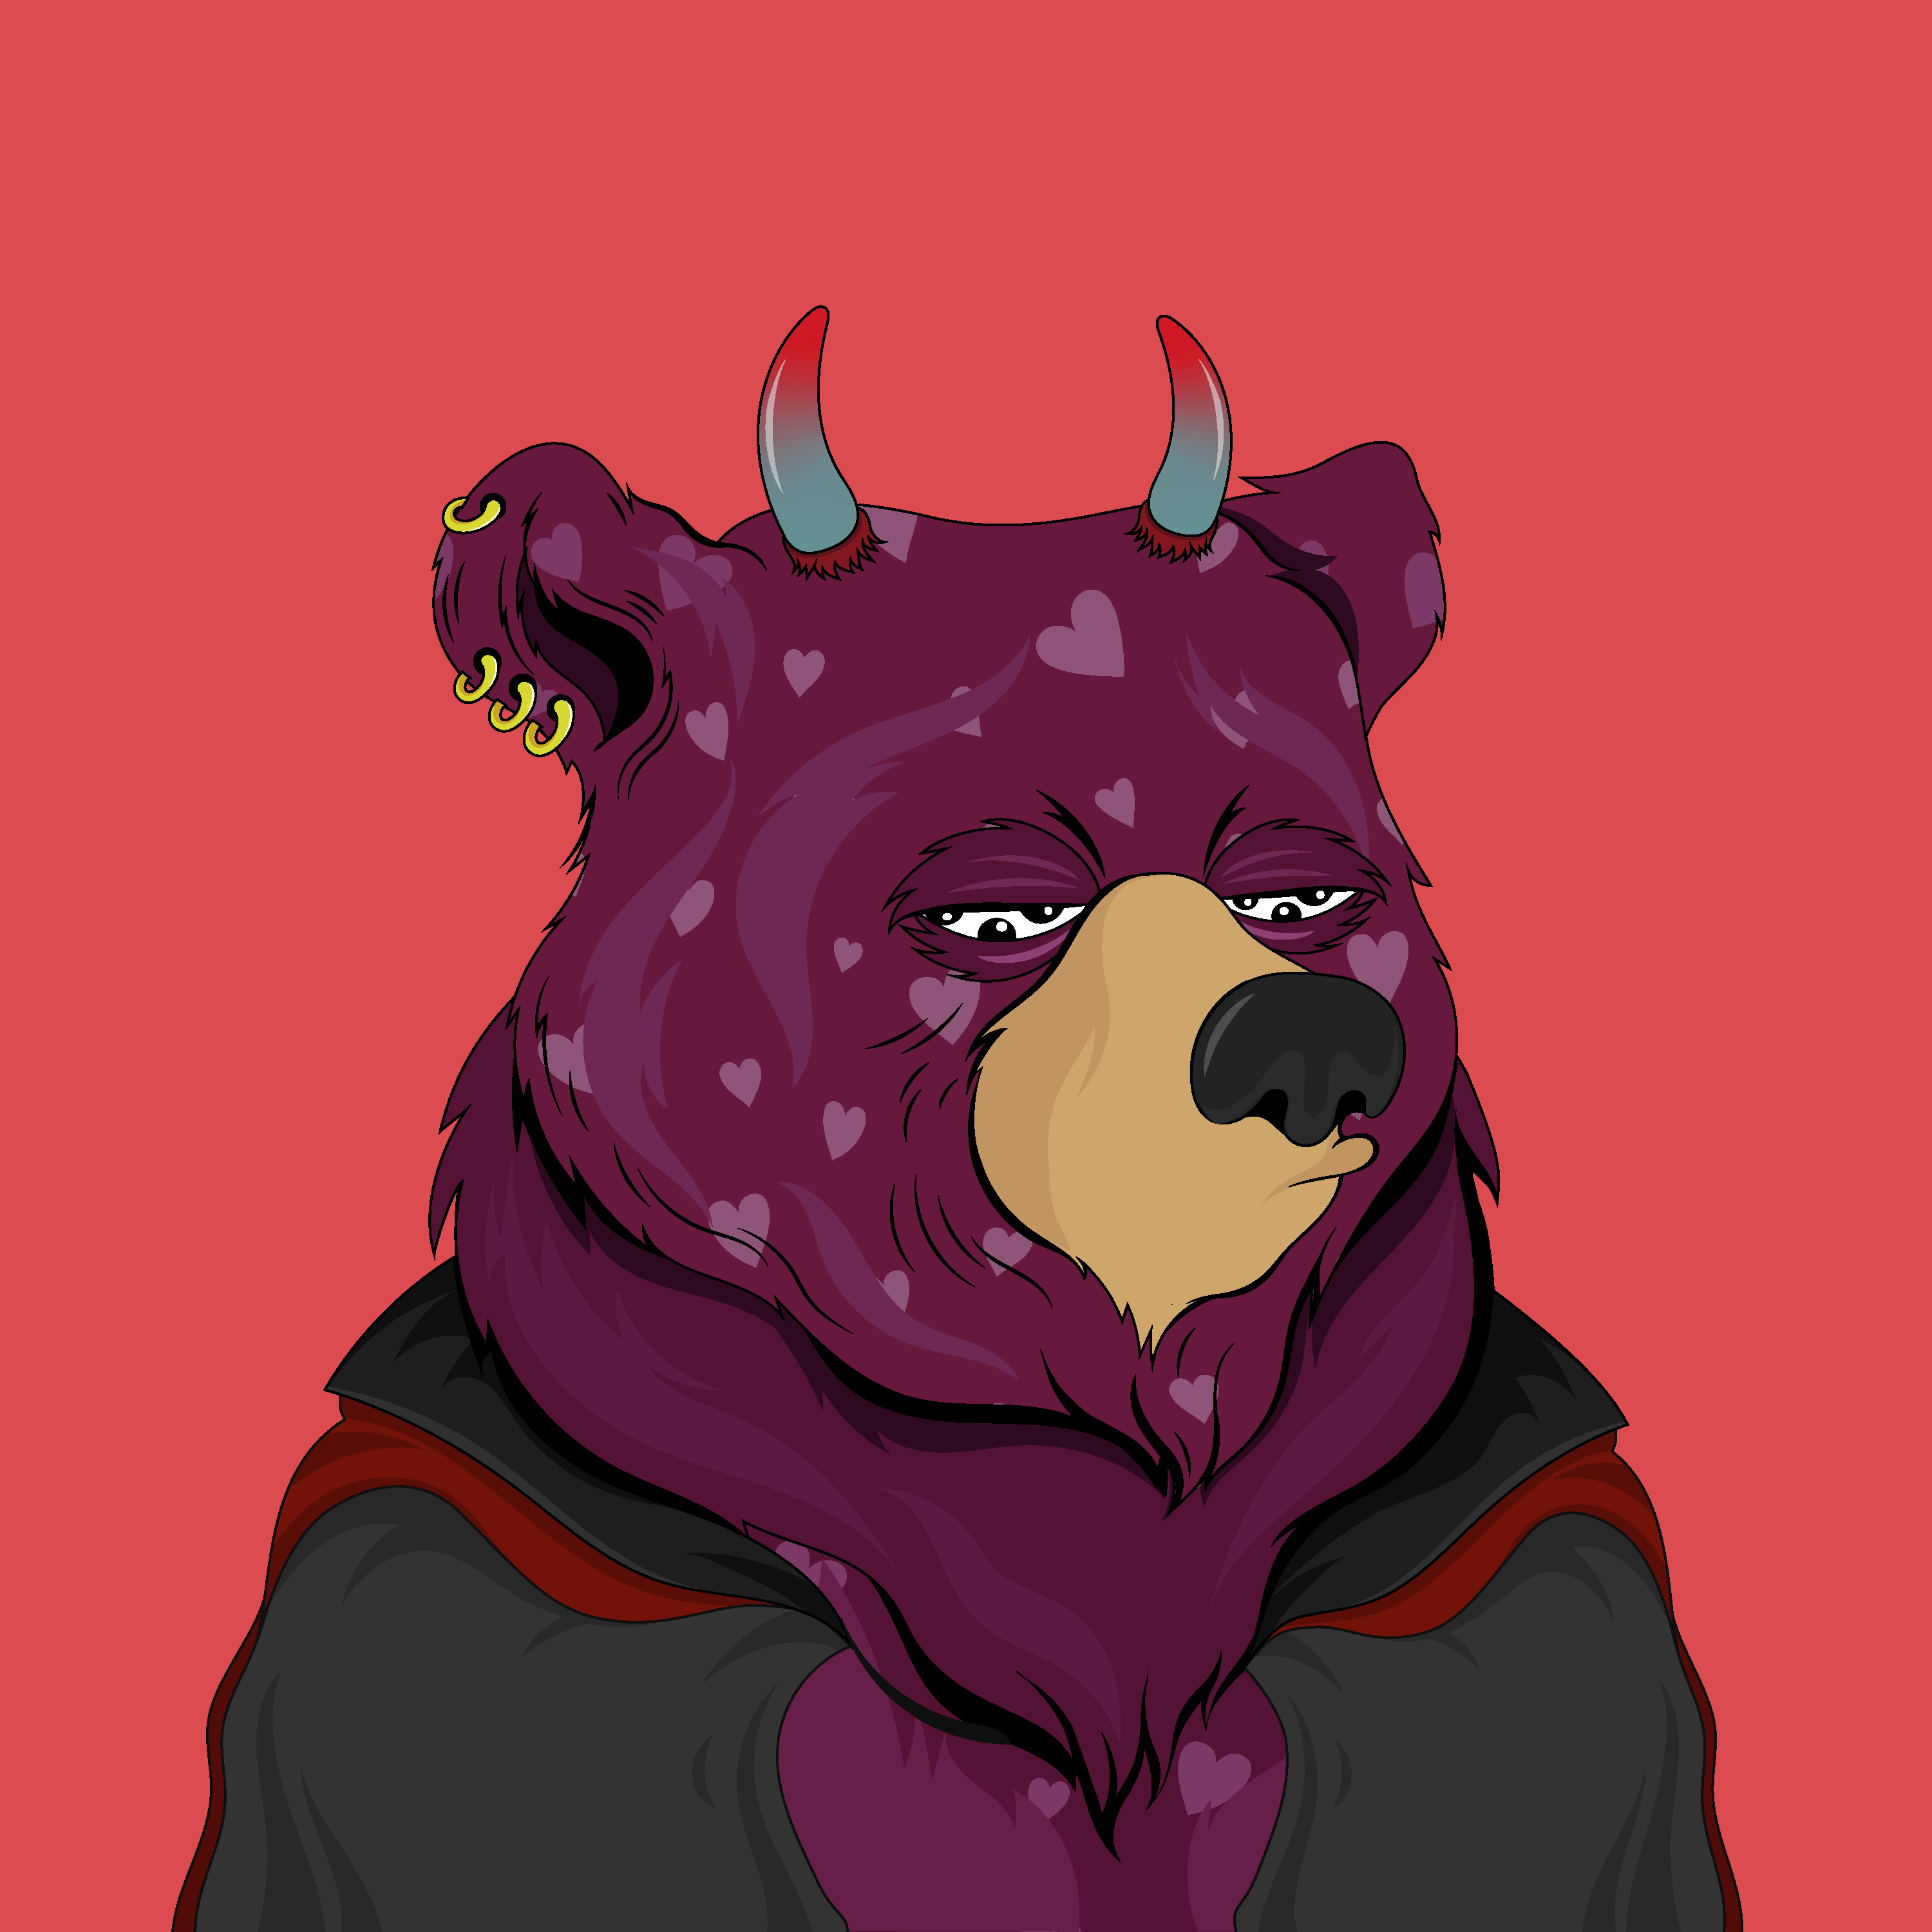 Fancy Bears Metaverse - Collection